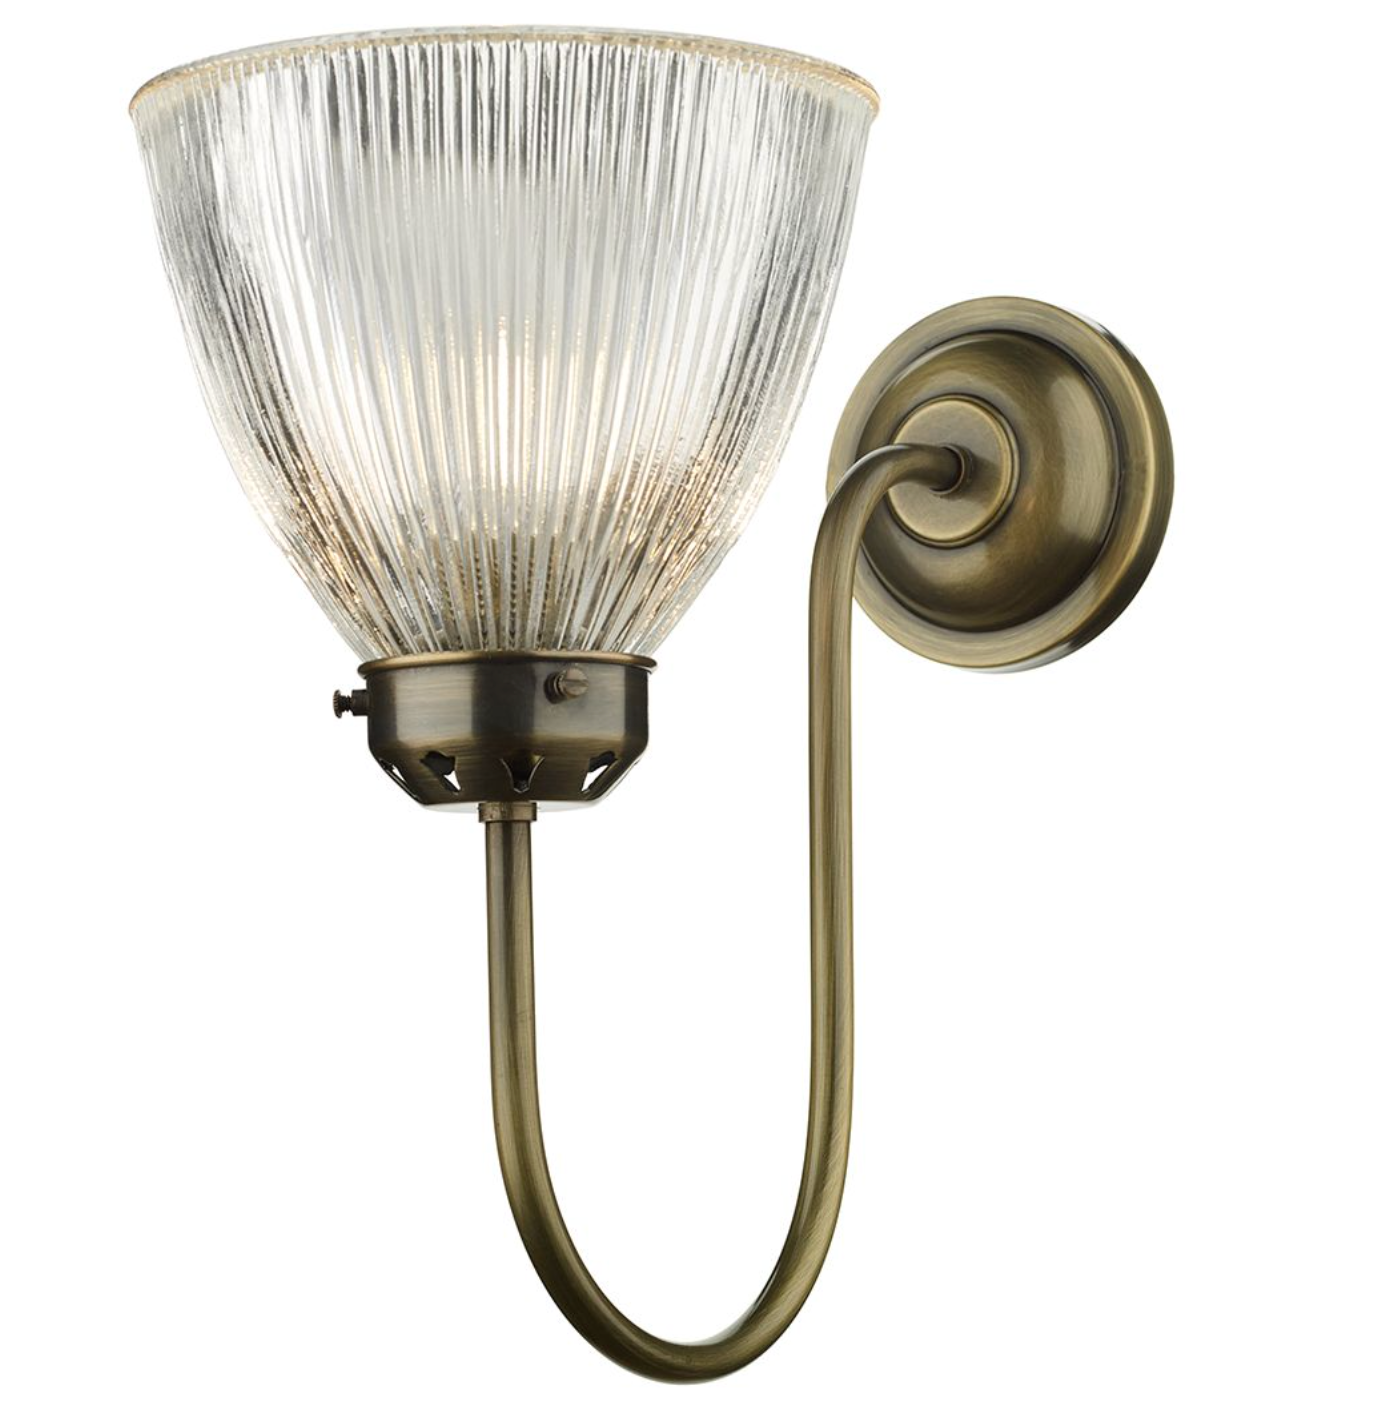 Cam Antique Brass Swan Neck Wall Light with Prismatic Glass - ID 10327 LIMITED STOCK